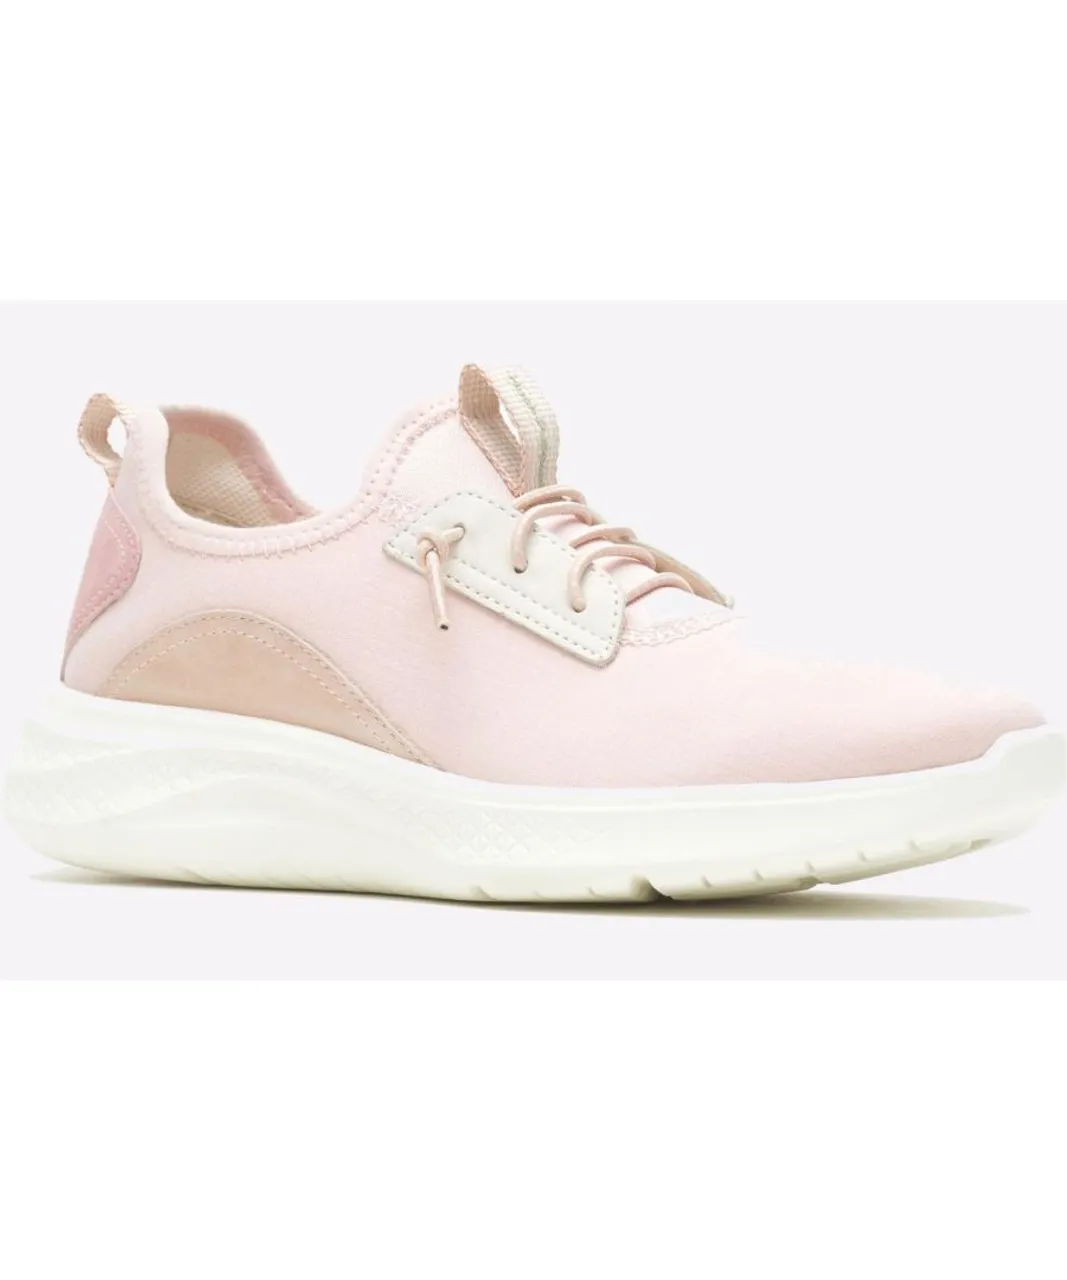 Hush Puppies Elevate Bungee Trainers Womens - Pink